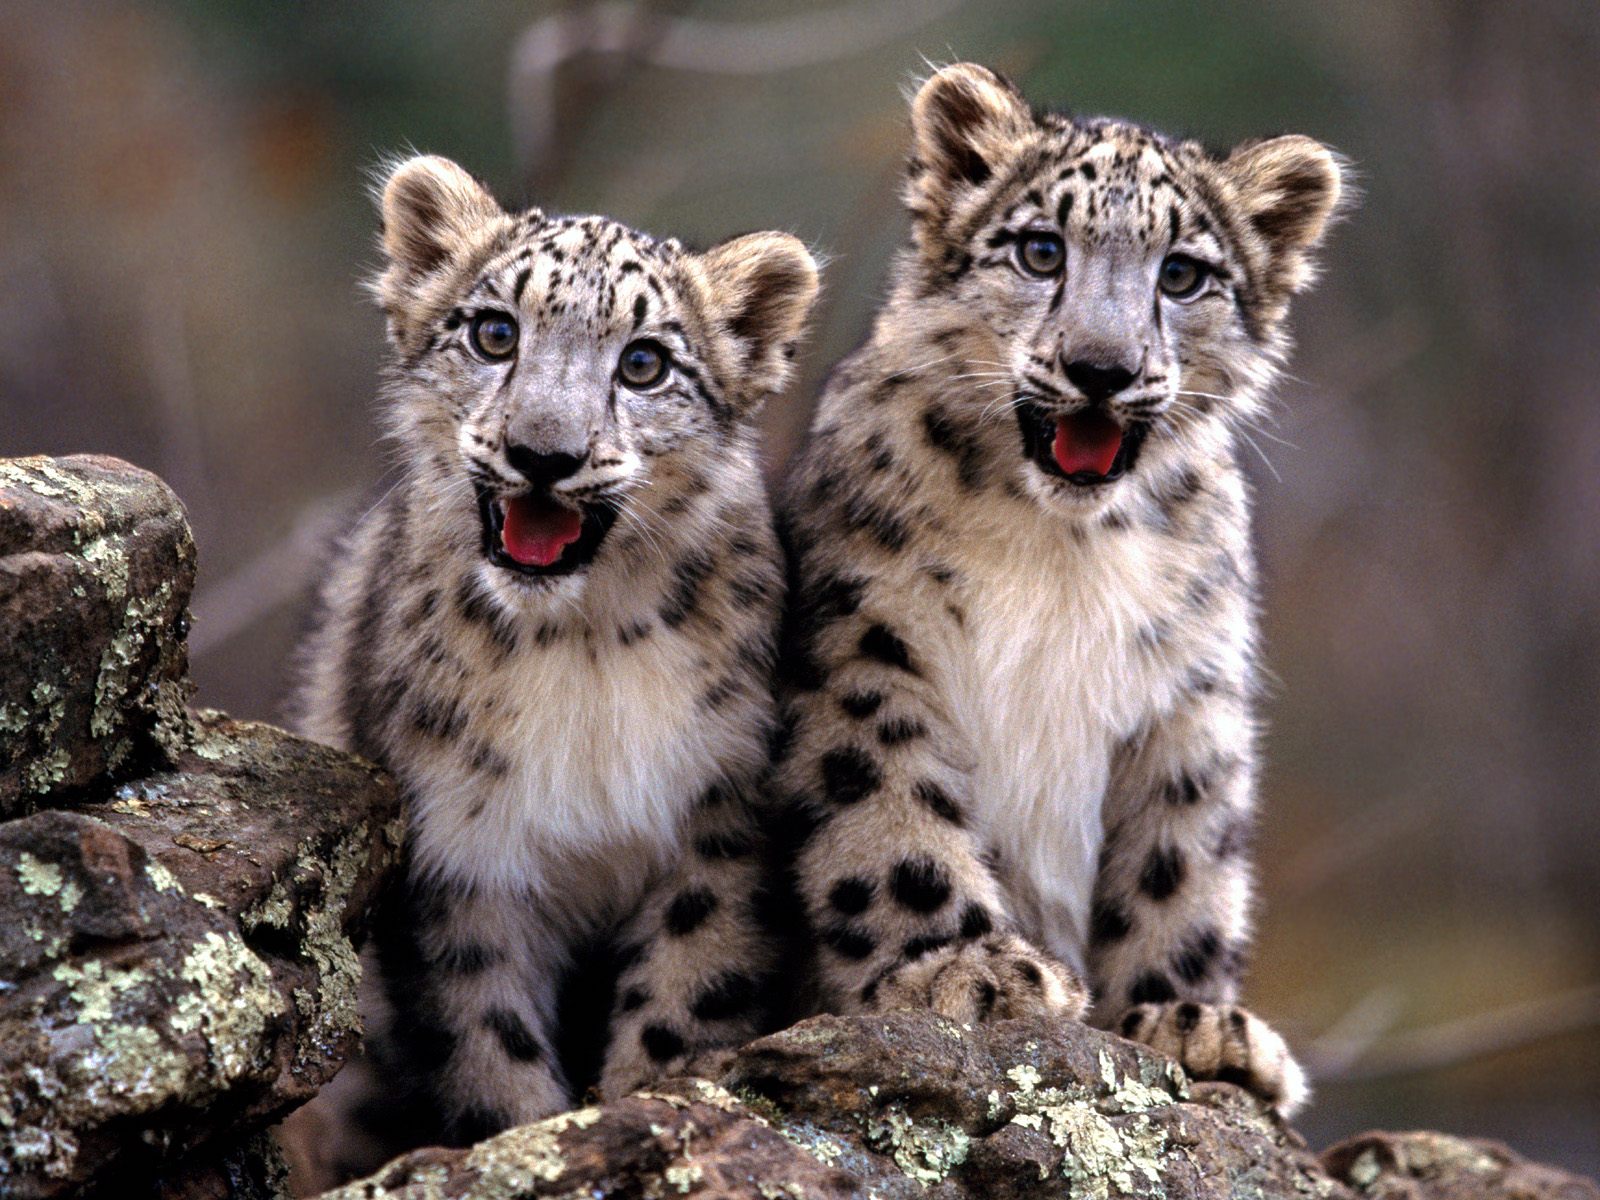 Download HQ Leopards and Cheetahs wallpaper / Animals / 1600x1200